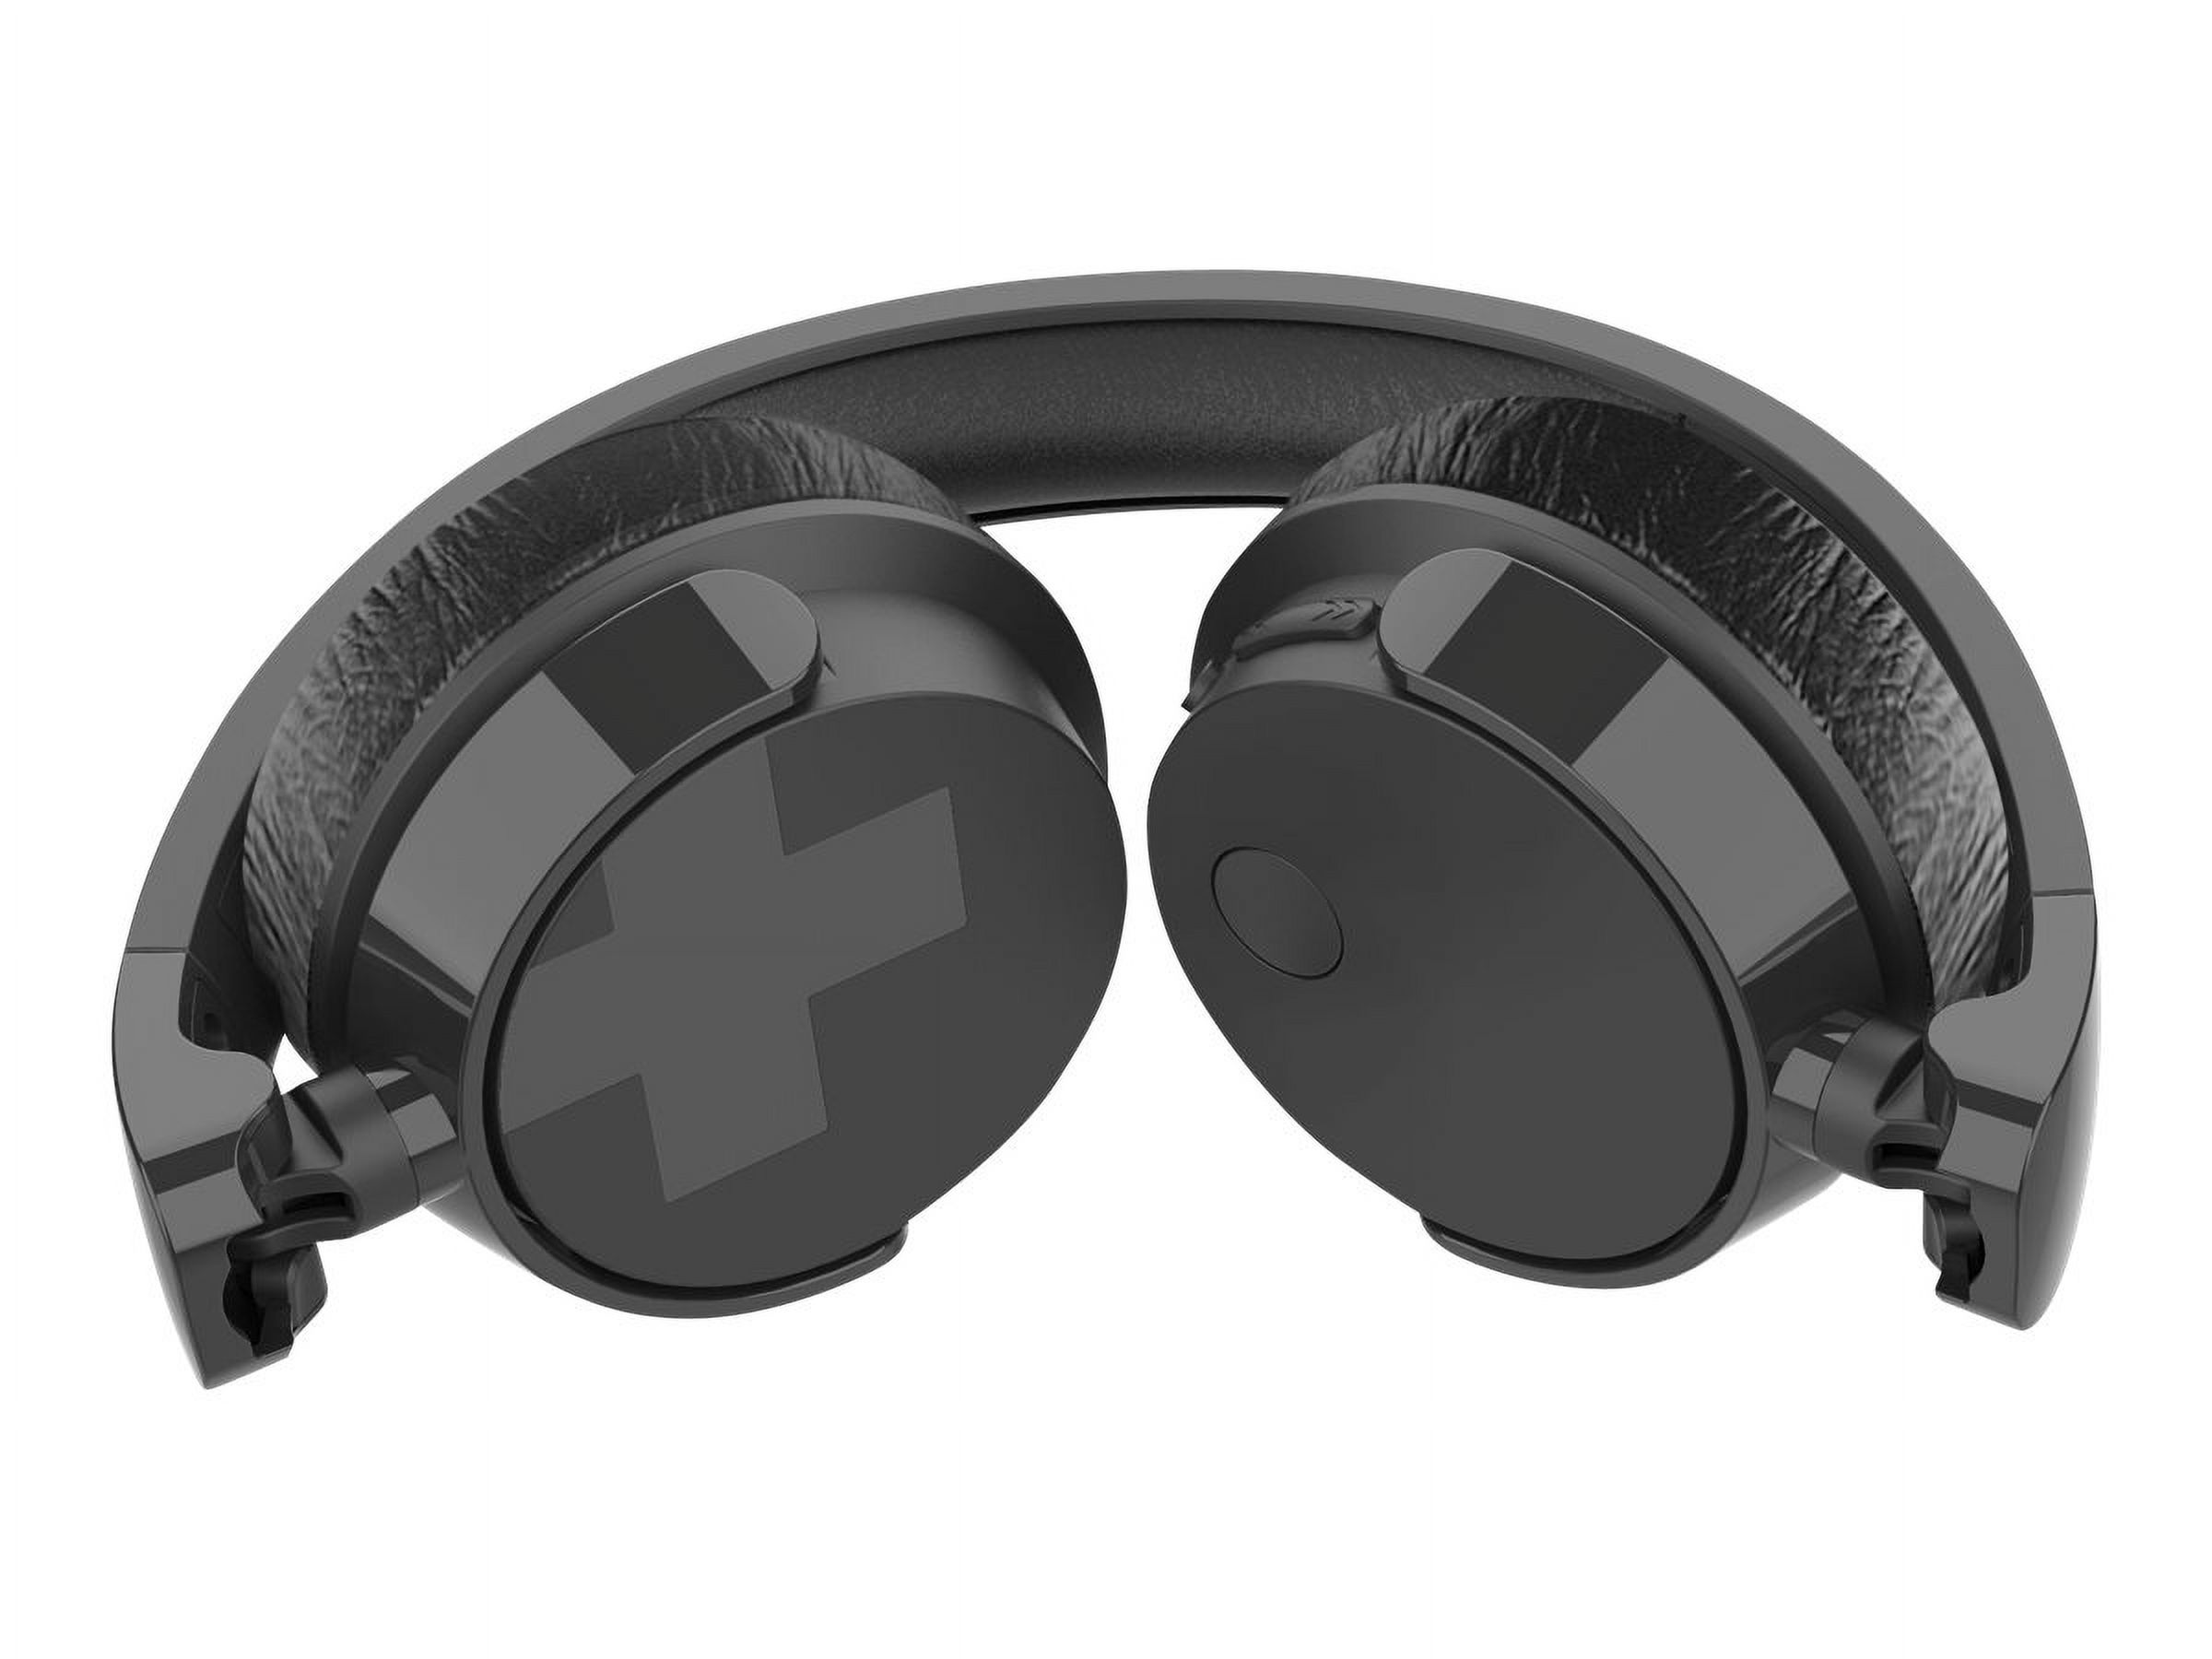 Philips Bass+ BH305 Wireless Active Noise Canceling Headphones - image 2 of 8